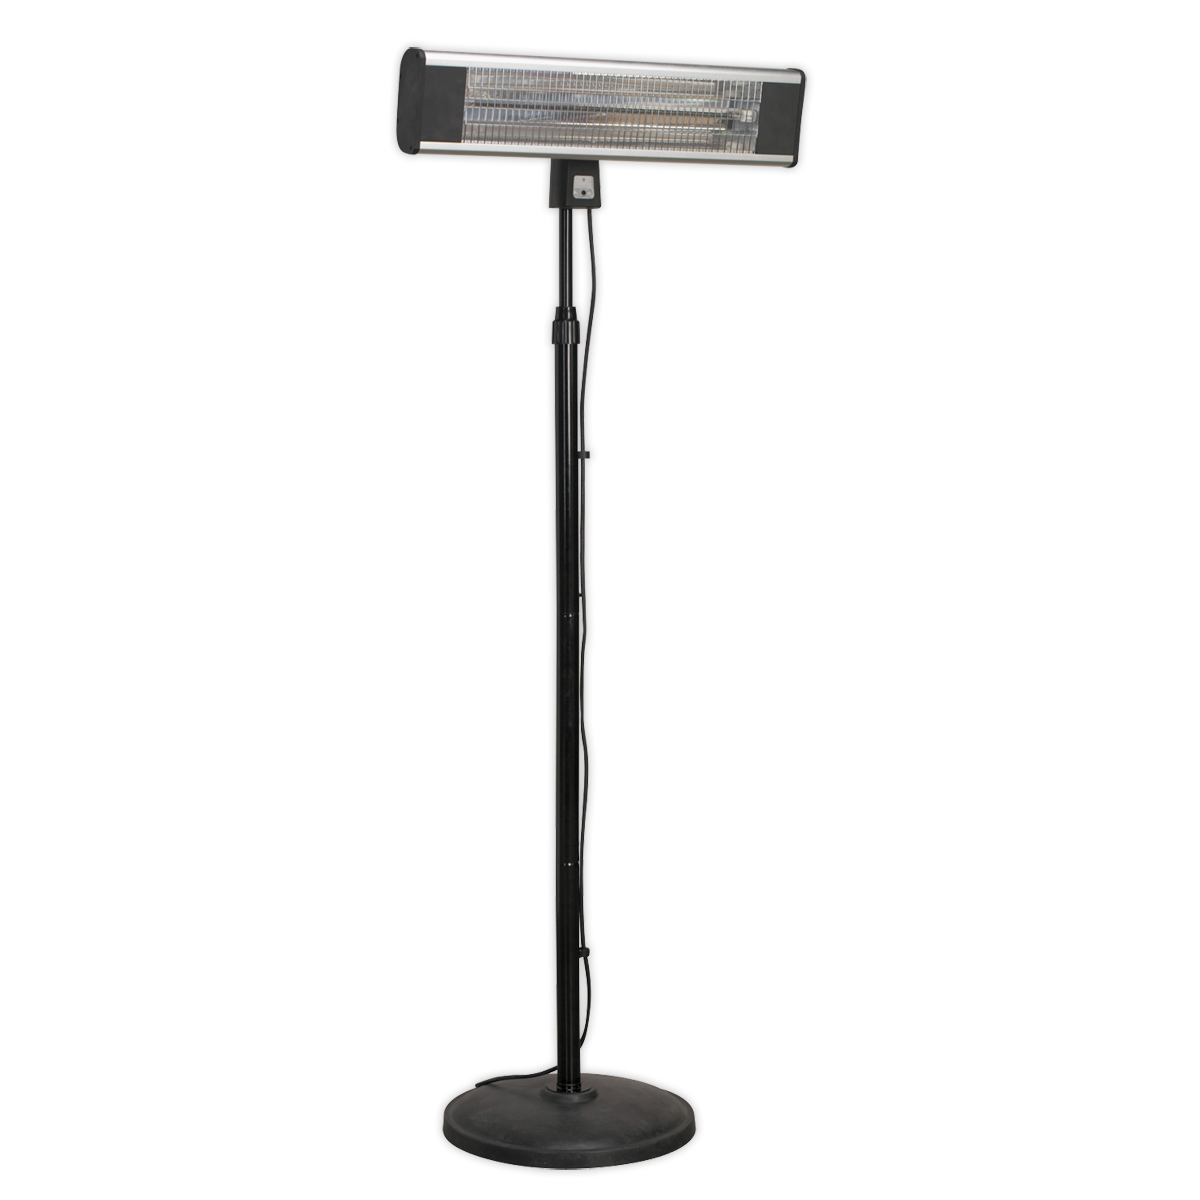 SEALEY - IFSH1809R High Efficiency Carbon Fibre Infrared Patio Heater 1800W/230V with Telescopic Floor Stand